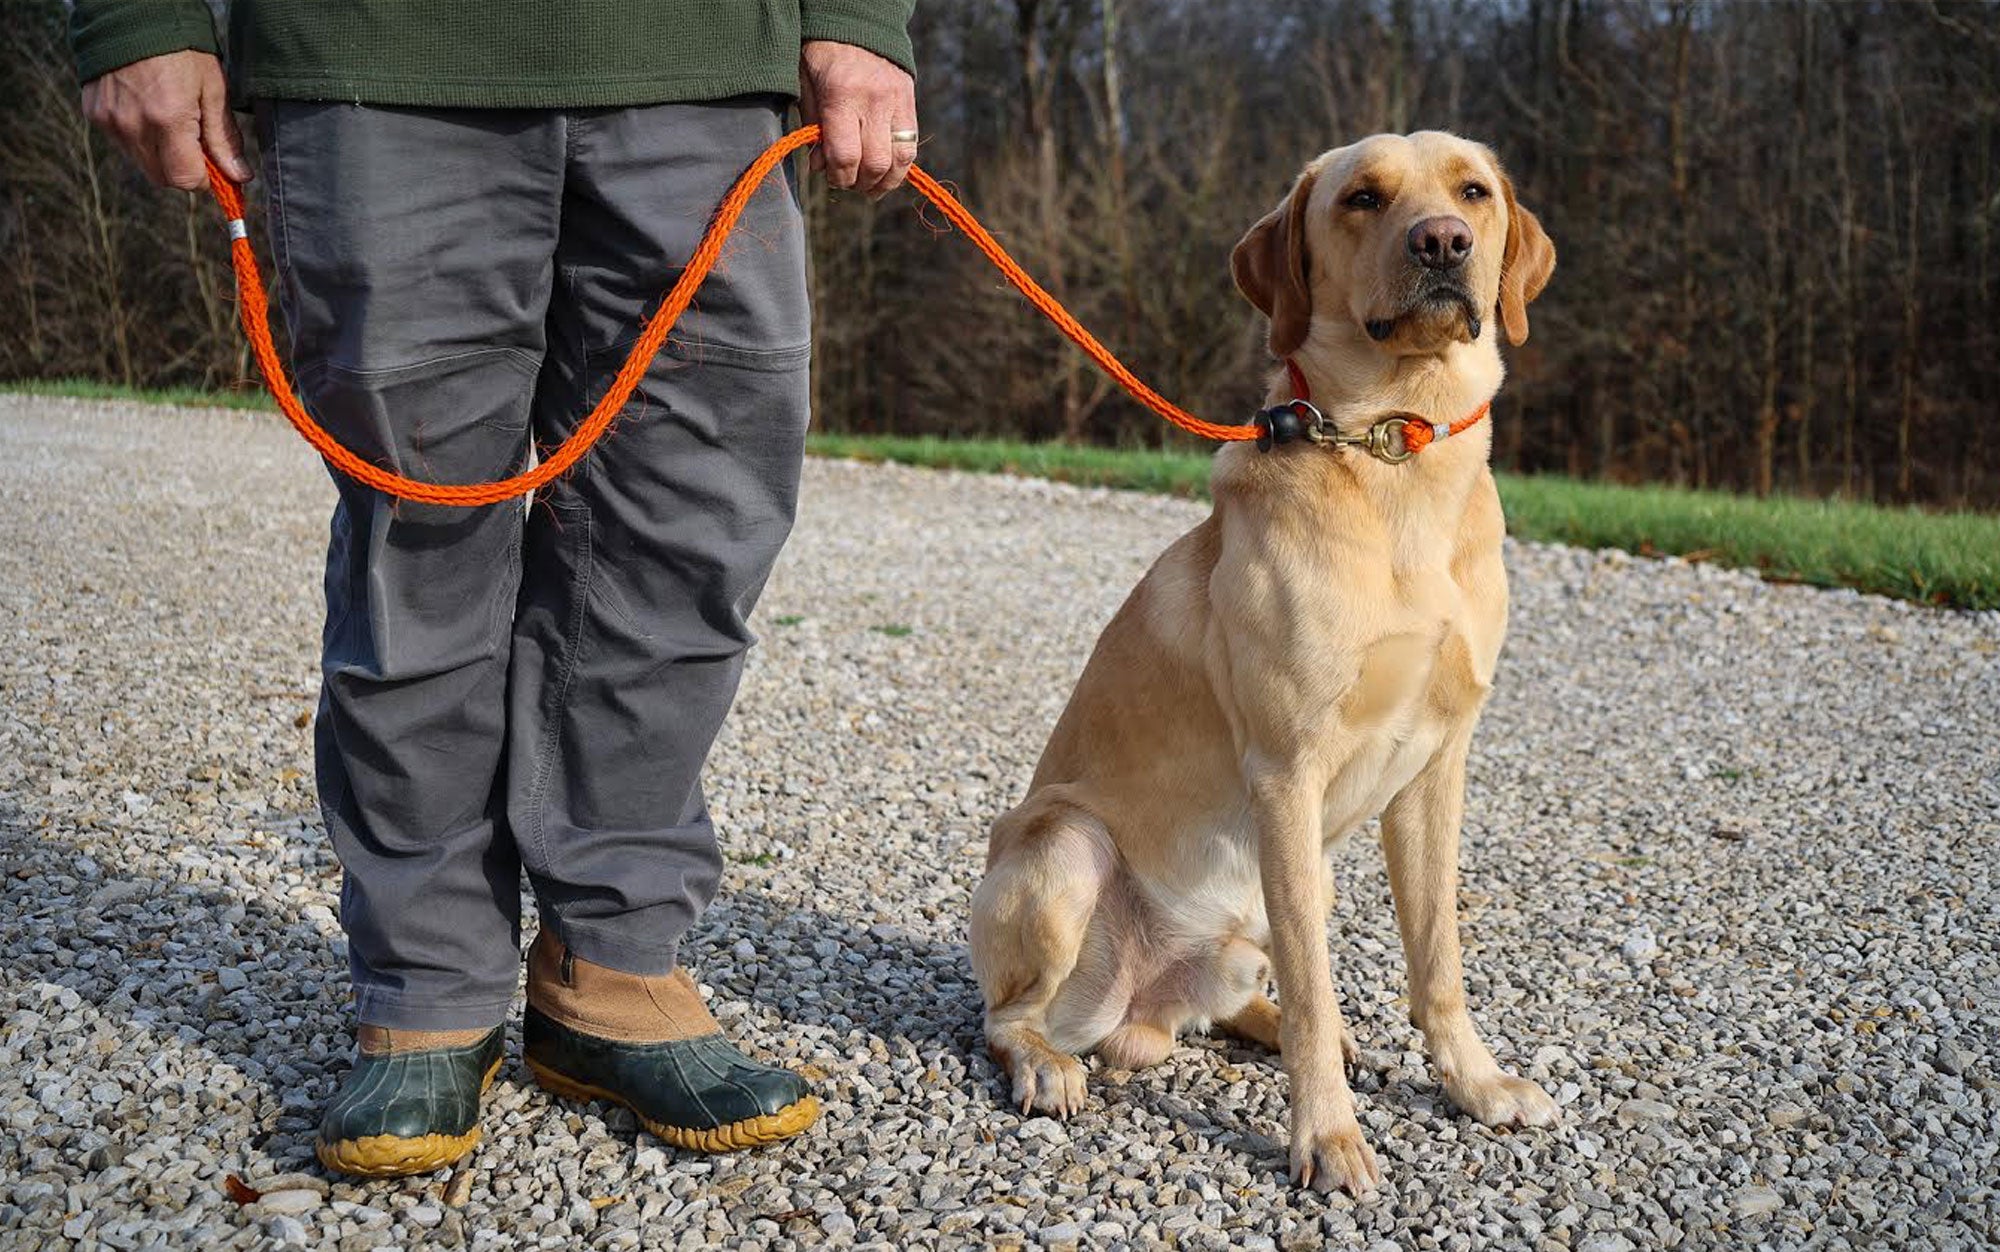 Even the best dog training collars can’t help if you don’t follow through on your training.